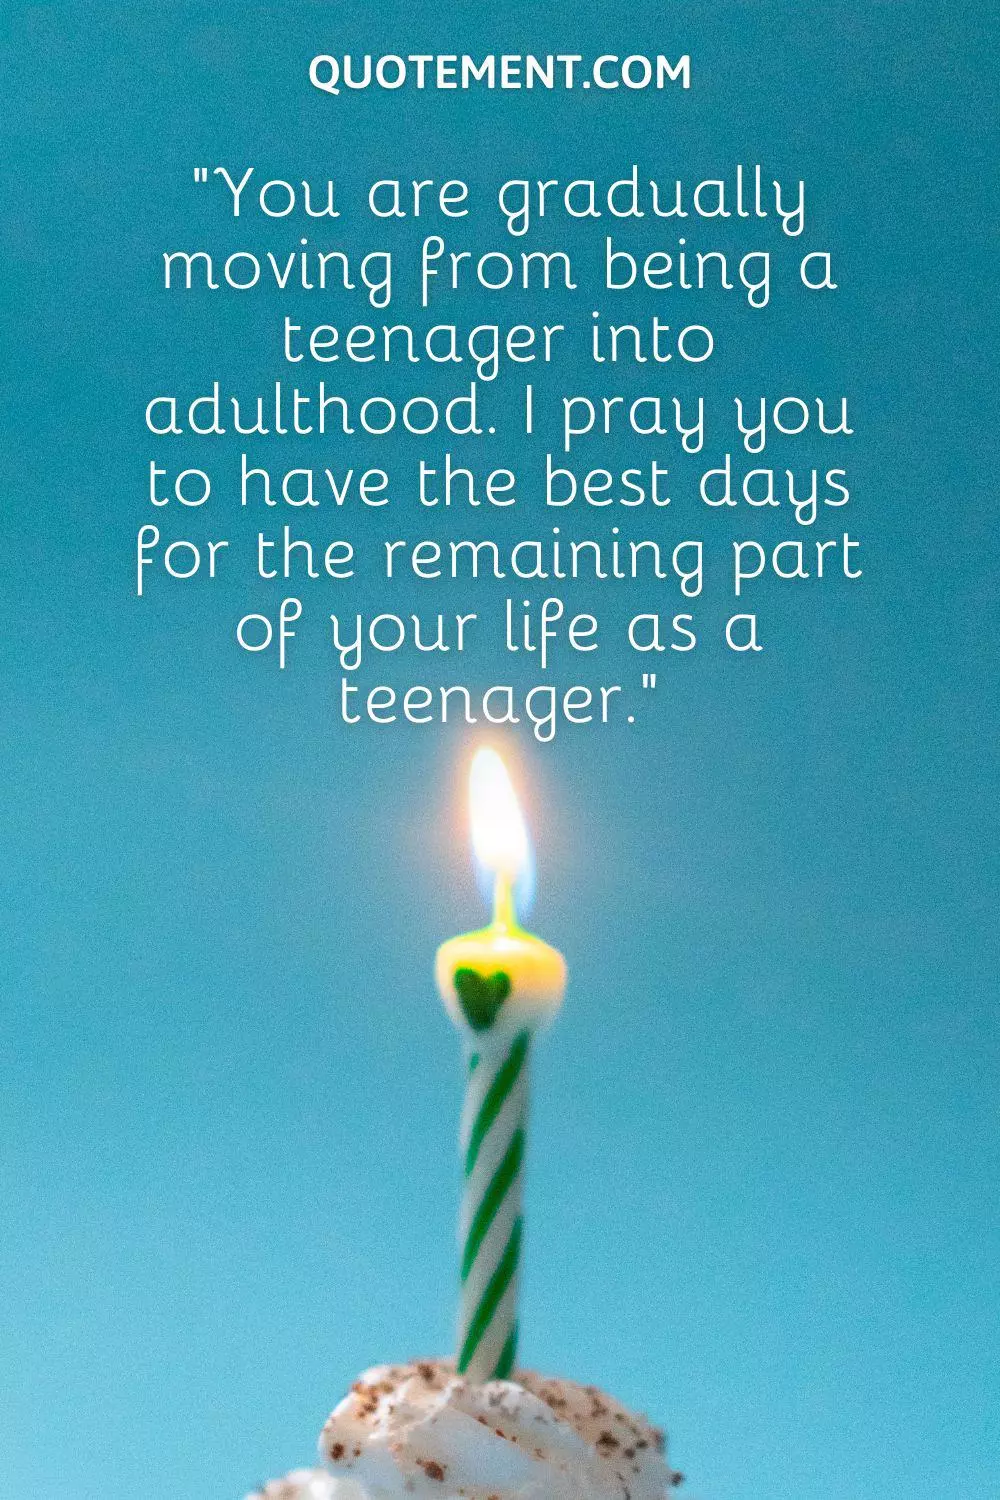 “You are gradually moving from being a teenager into adulthood. I pray you have the best days for the remaining part of your life as a teenager.”